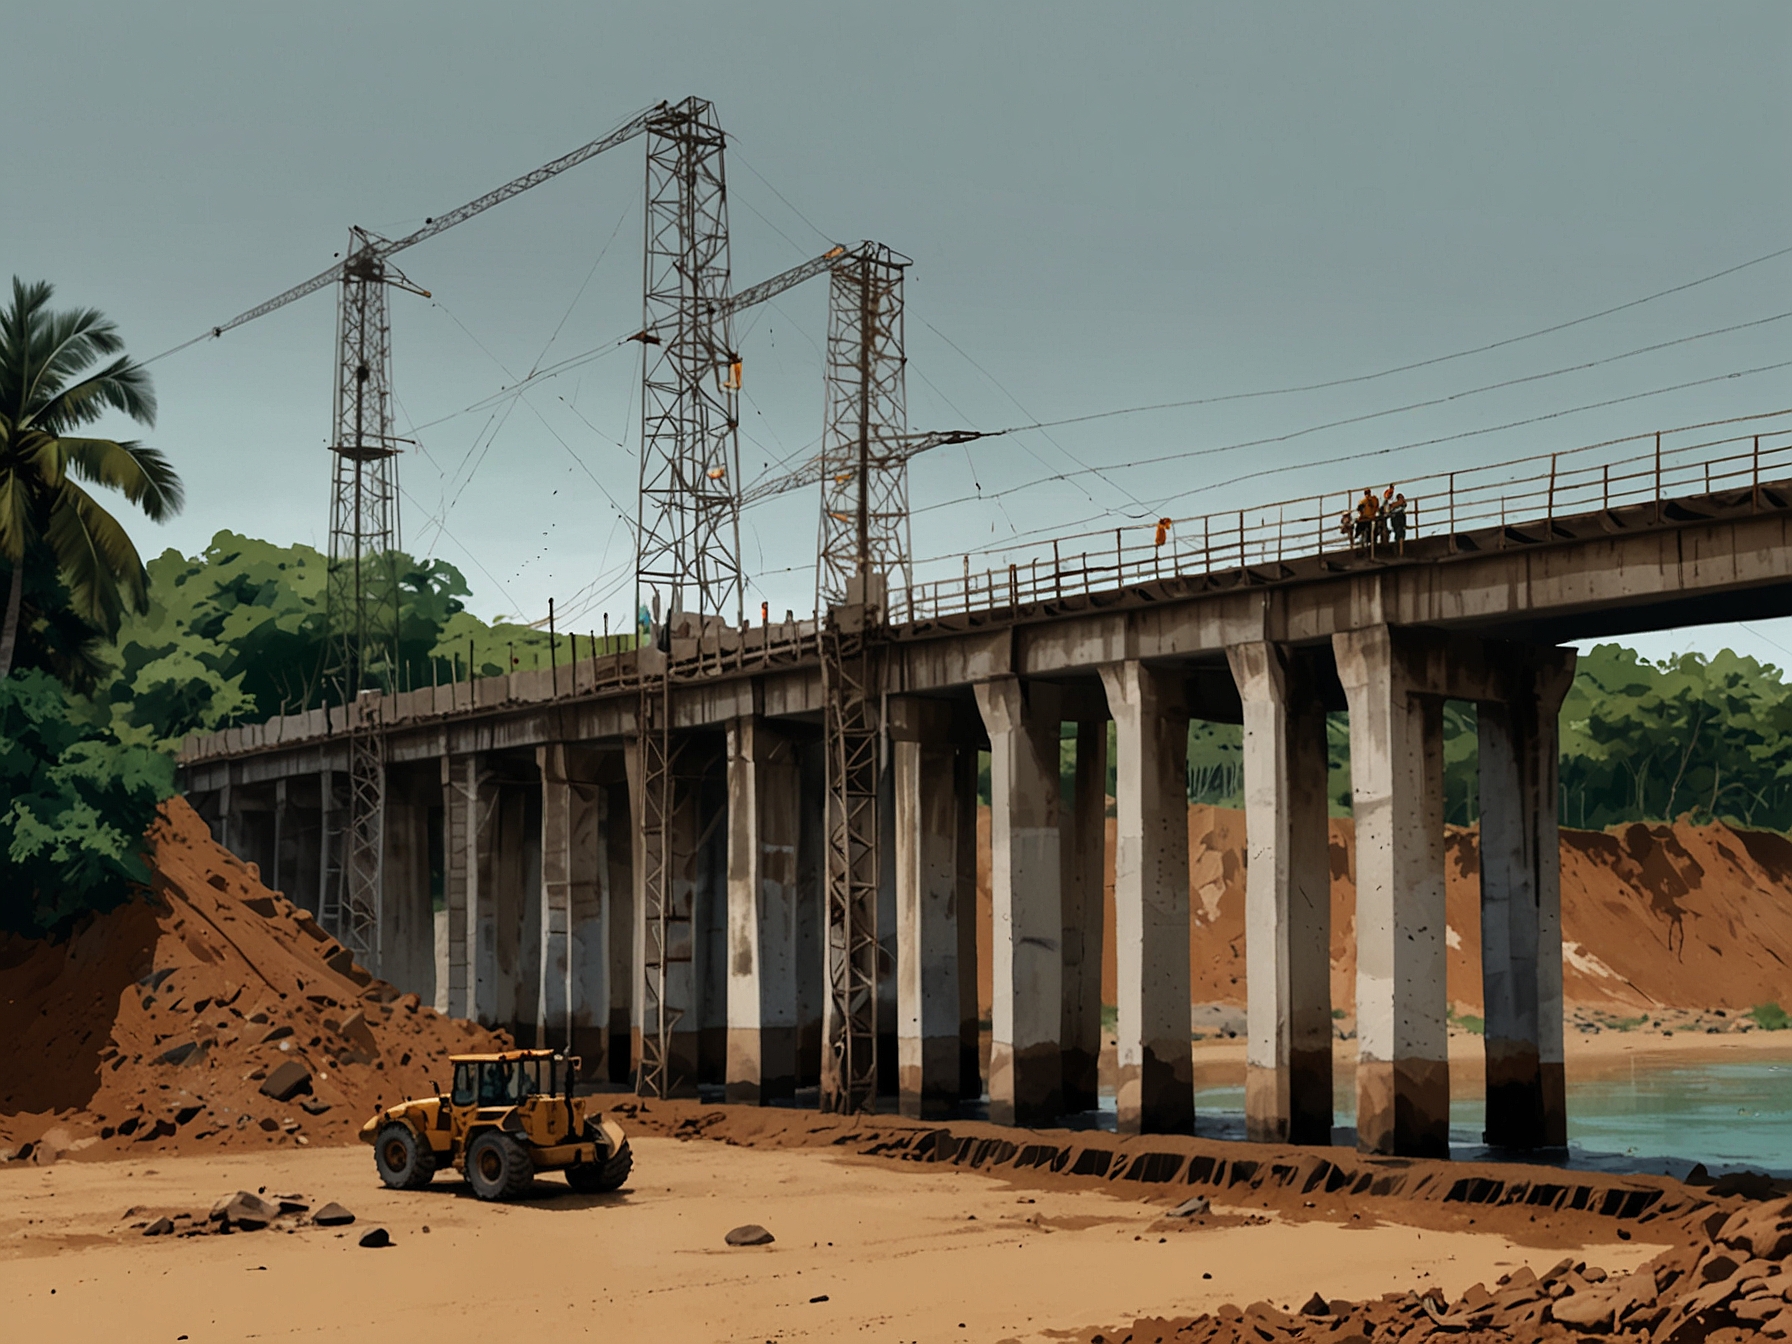 A halted infrastructure project in Sri Lanka set to resume after securing the debt deal. Reviving such projects is crucial for boosting economic activity, creating jobs, and enhancing productivity.